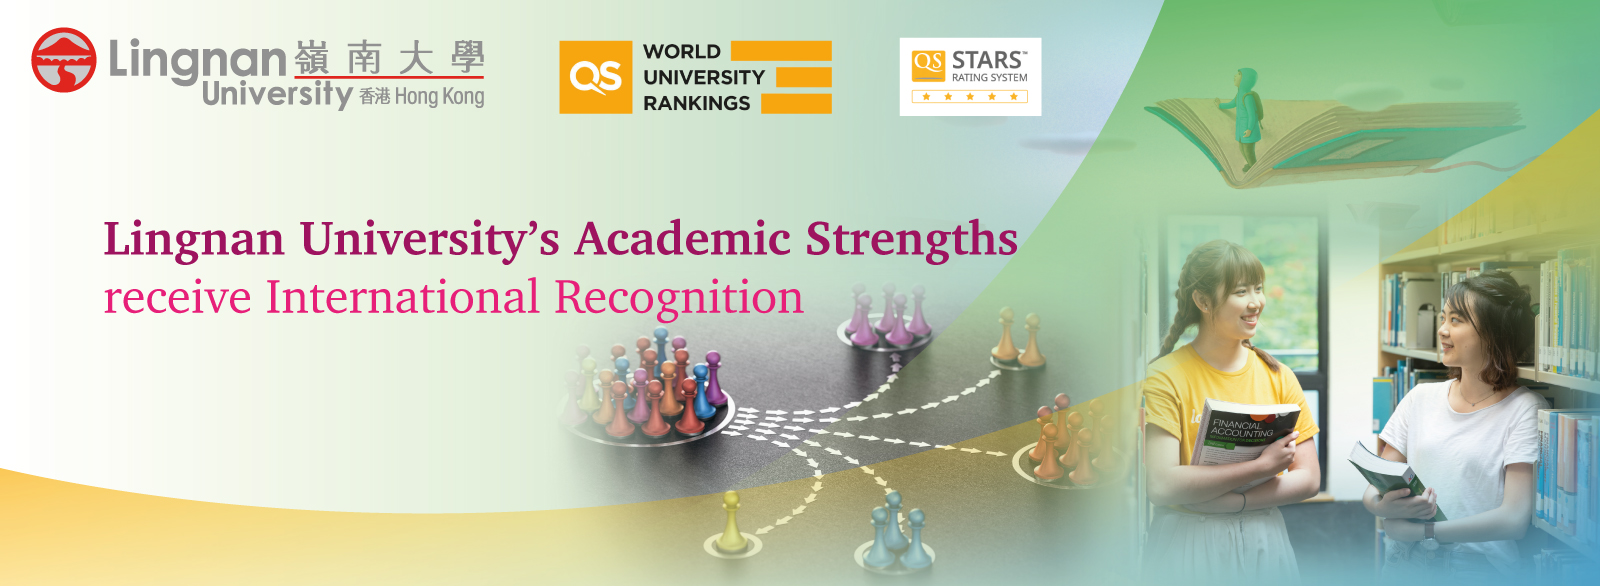 Lingnan University’s academic strengths receive international recognition